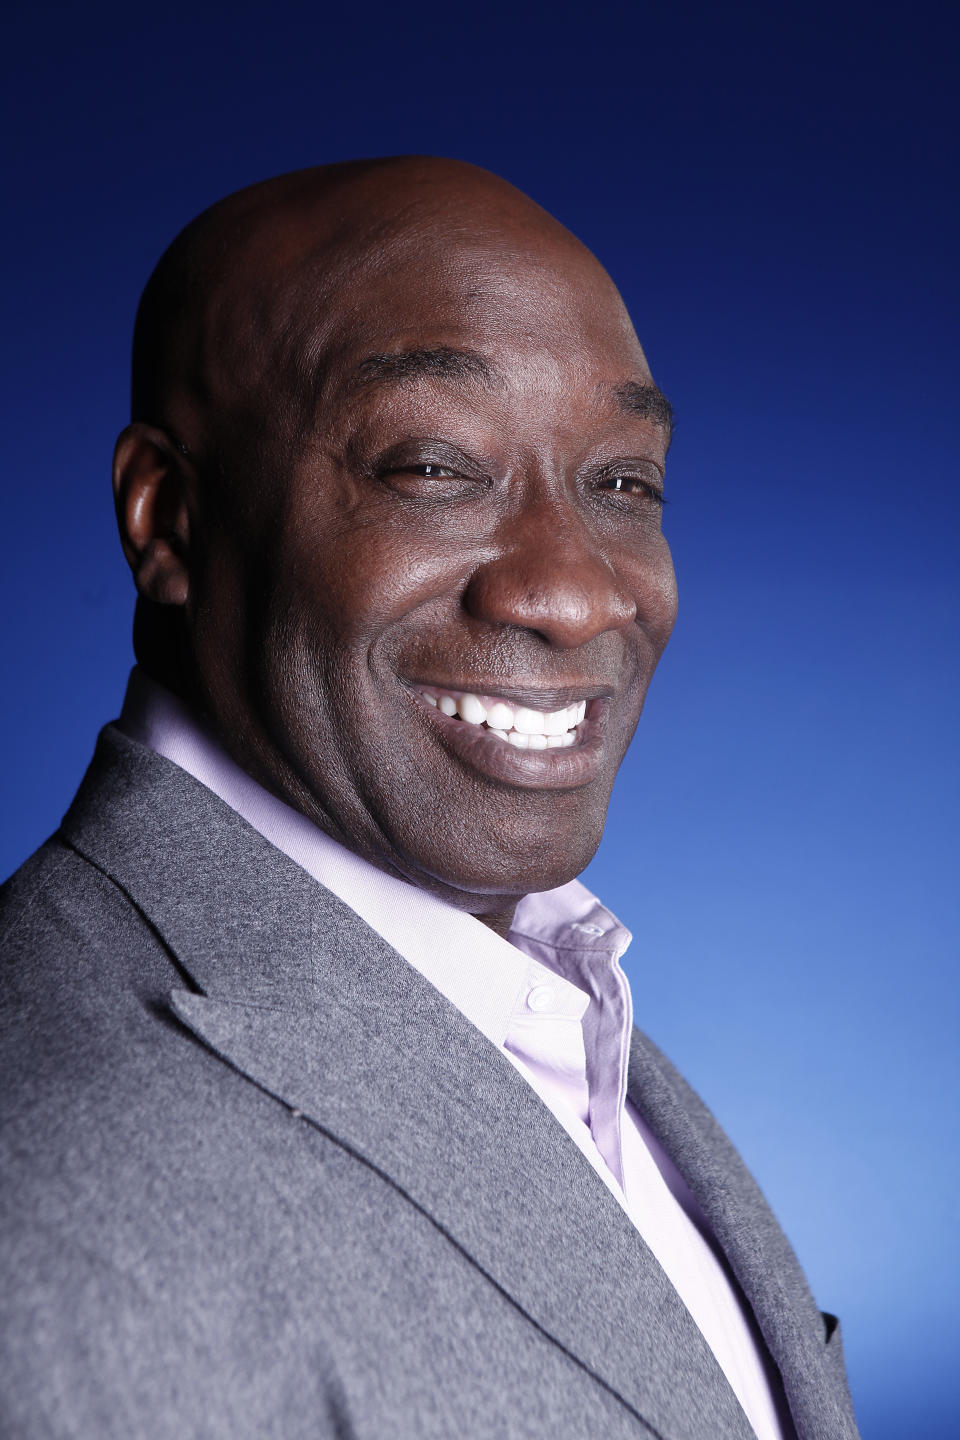 "The Green Mile" actor Michael Clarke Duncan died at the age of 54 on Sept. 3, 2012 in a Los Angeles hospital after nearly two months of treatment following a July 13, 2012 heart attack.